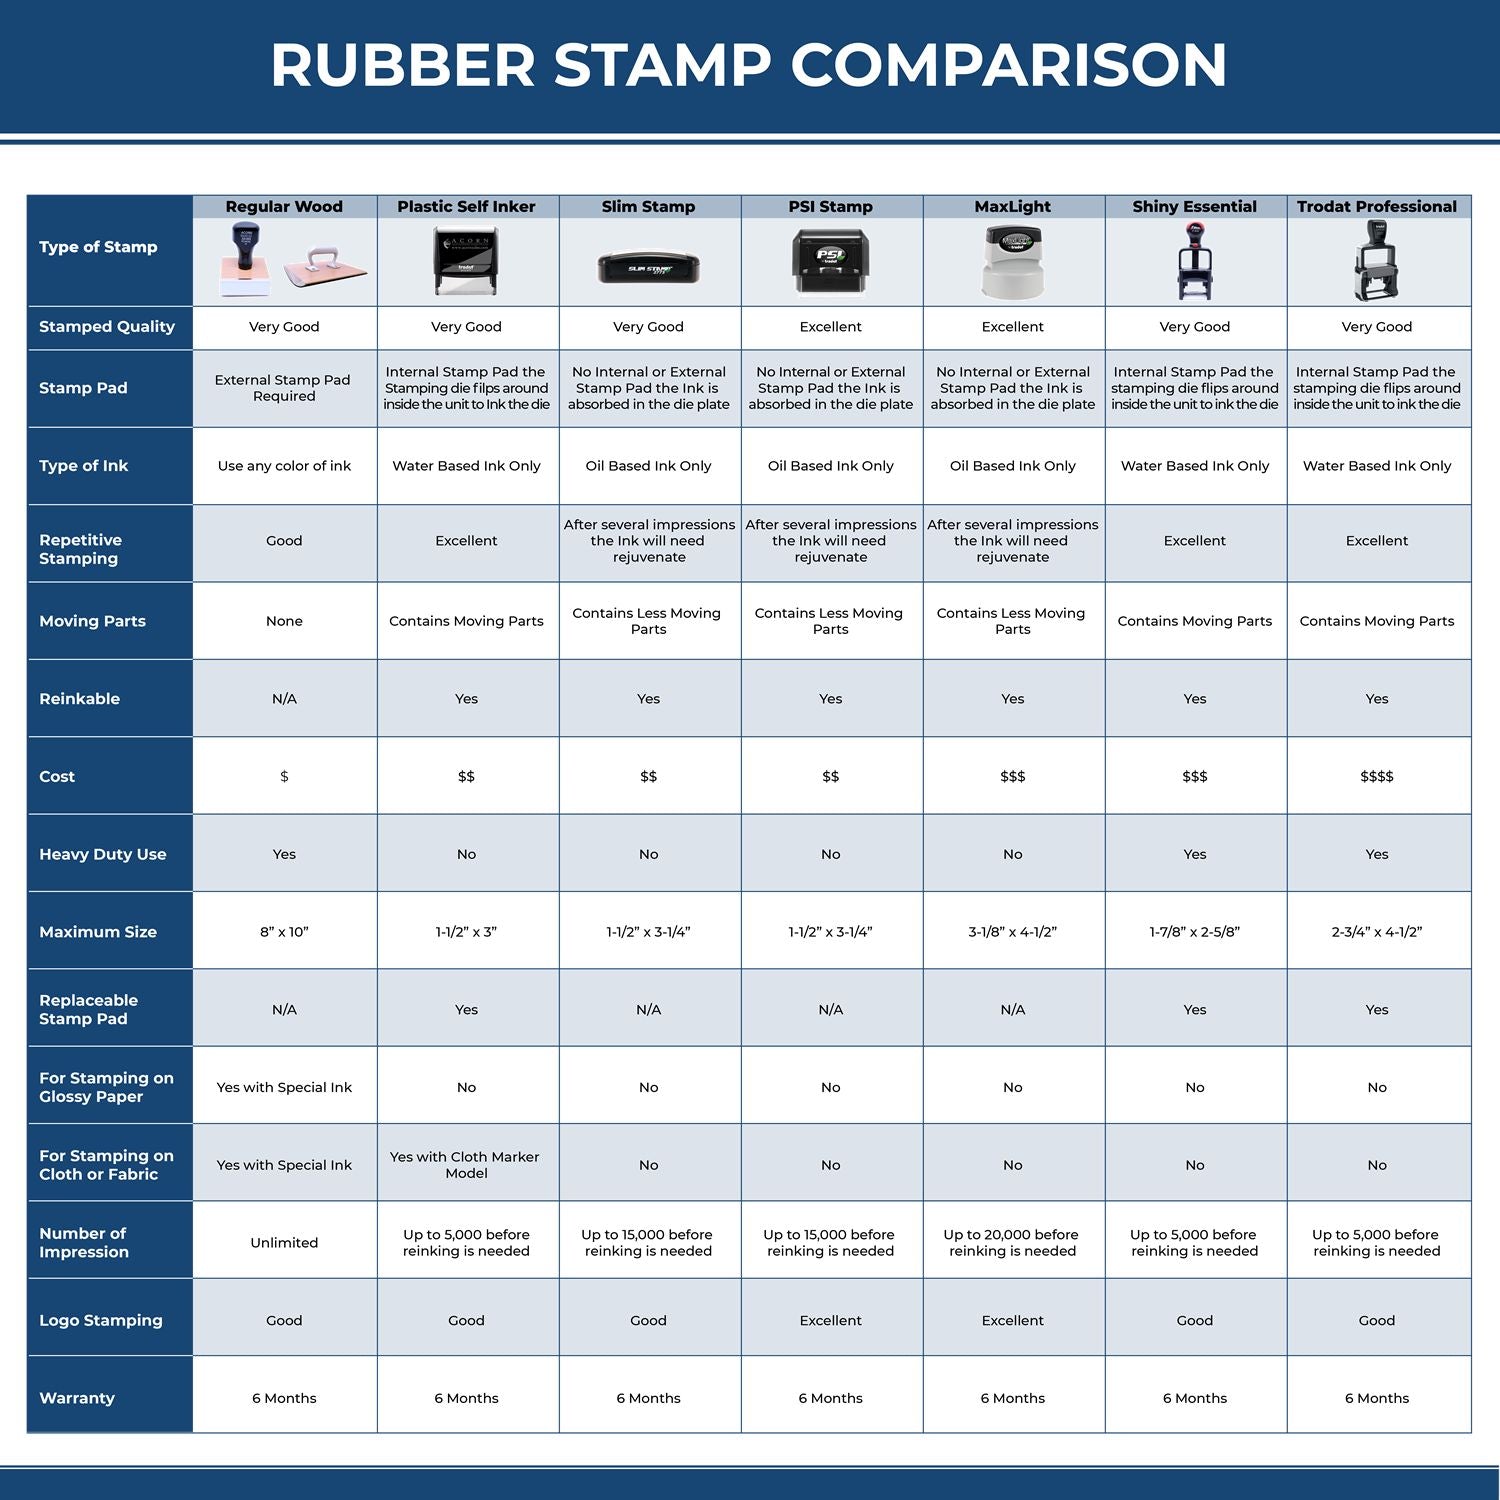 A comparison chart for the different types of mount models available for the Self-Inking New Mexico PE Stamp.